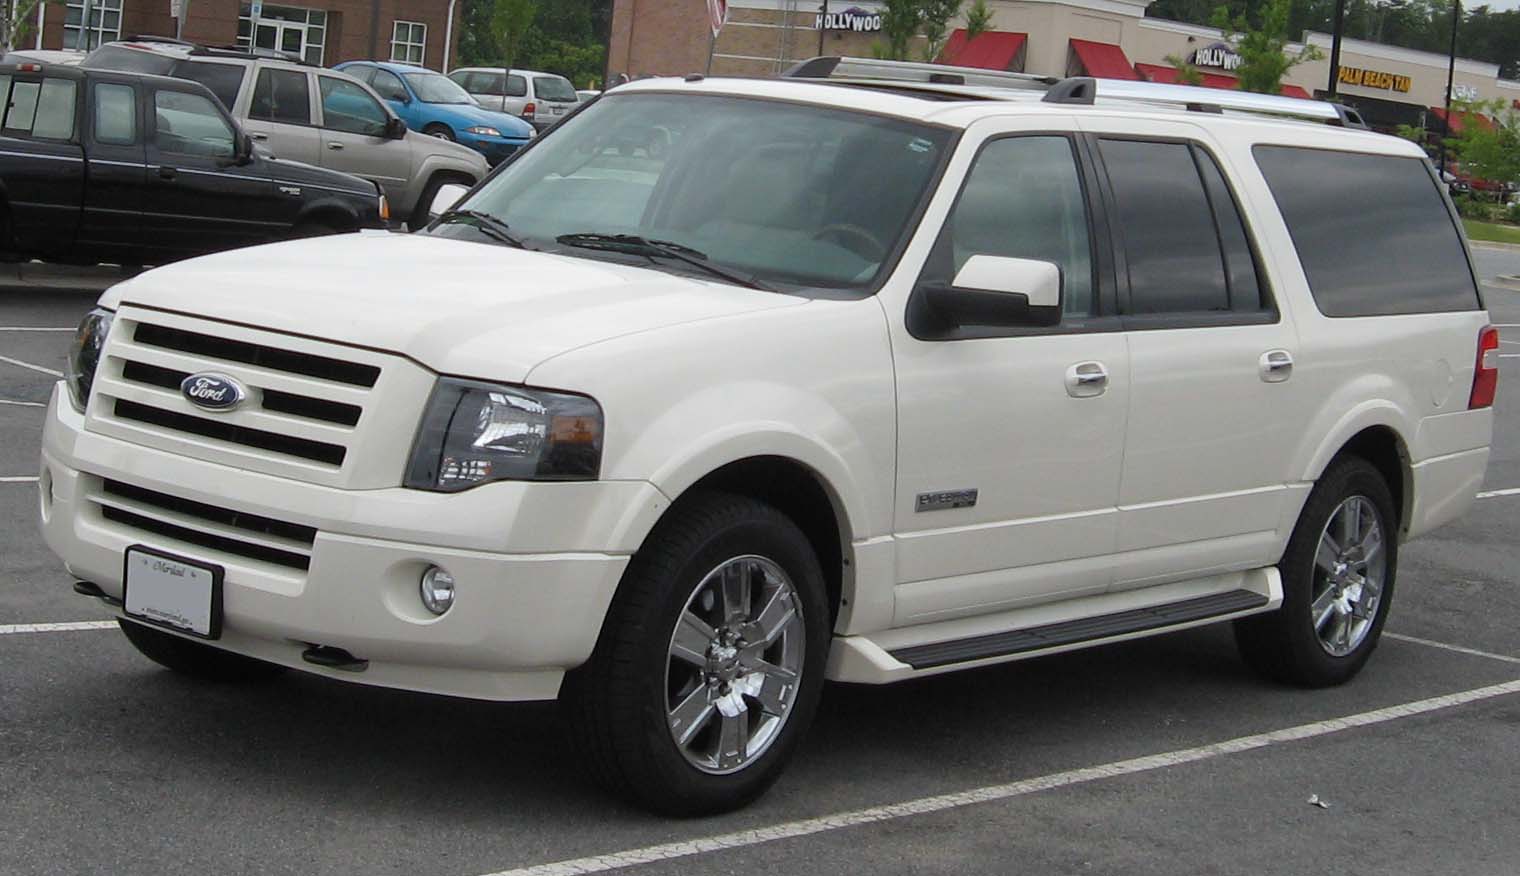 2010 Ford Expedition Vin Check Specs Recalls Autodetective